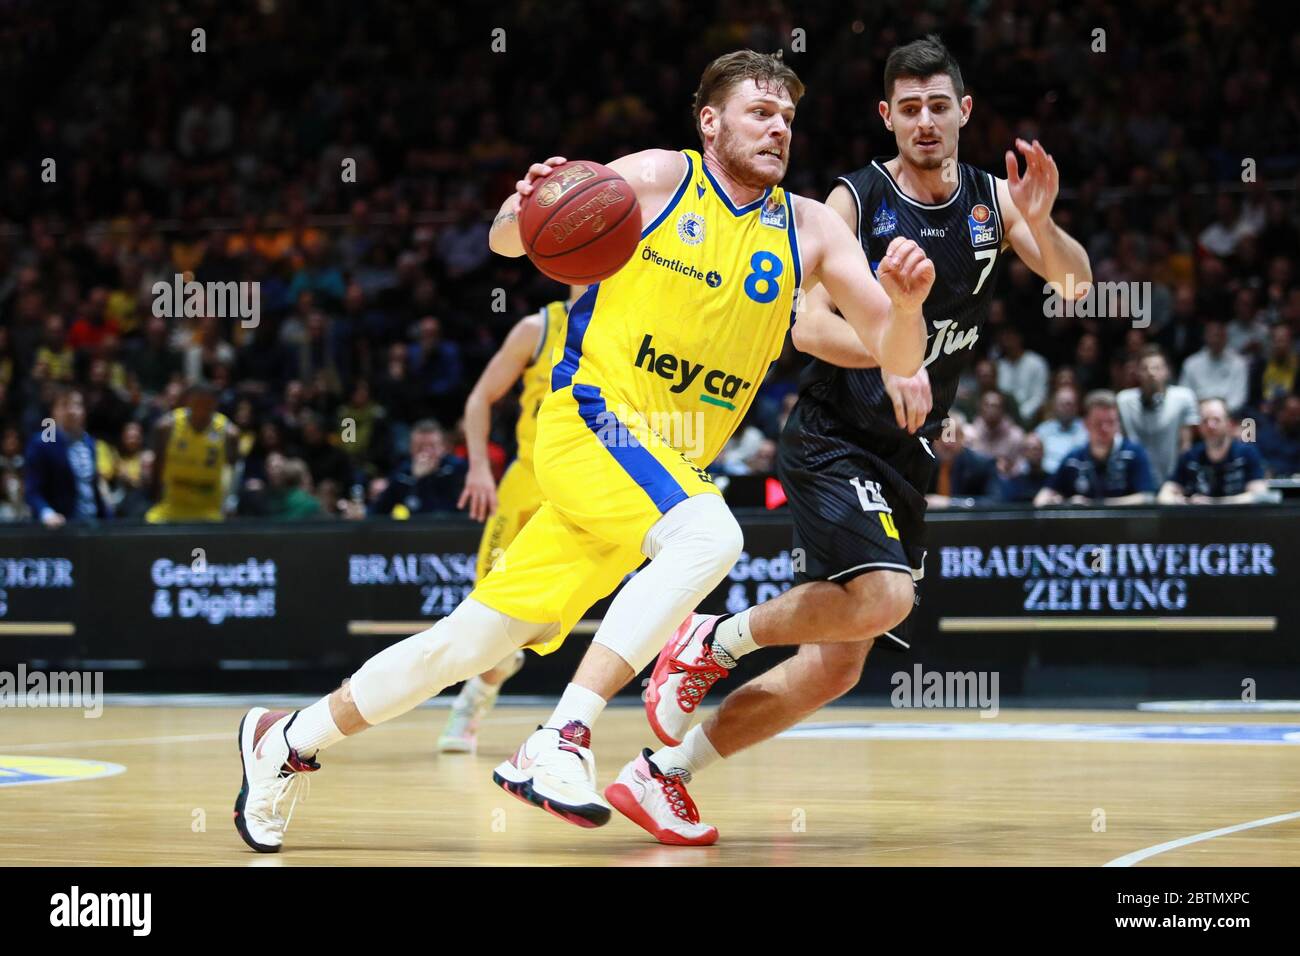 Braunschweig, Germany, December 27, 2019:Lucca Staiger of Basketball Braunschweig in action during the Basketball BBL Bundesliga game Stock Photo